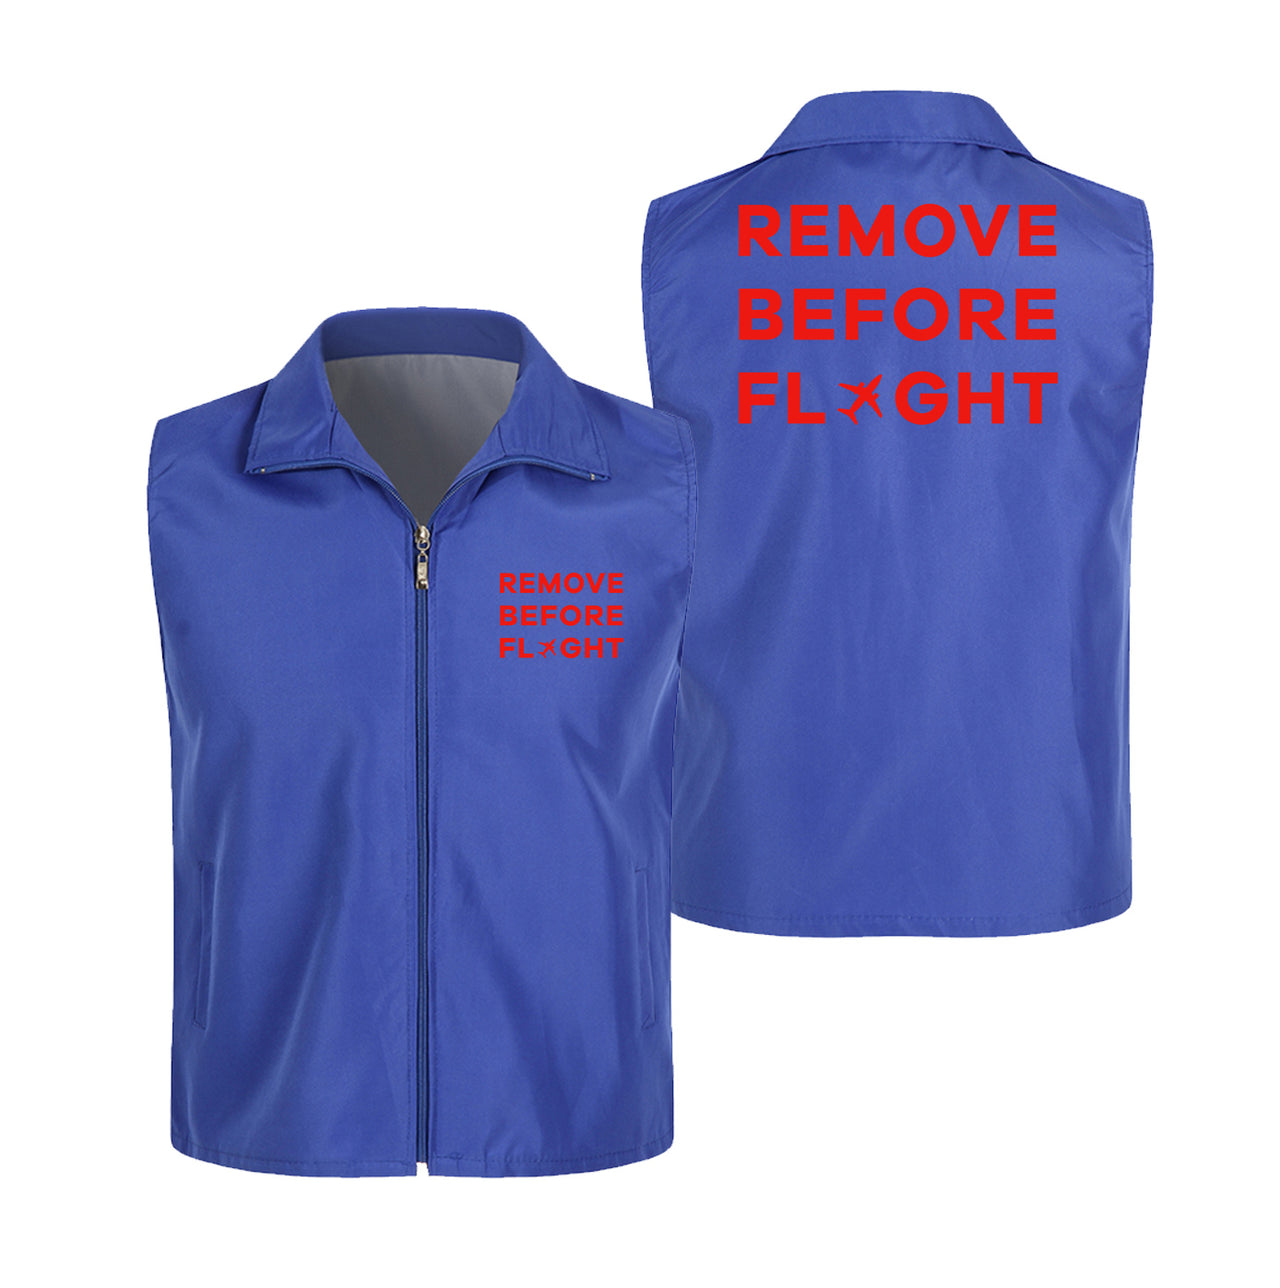 Remove Before Flight Designed Thin Style Vests